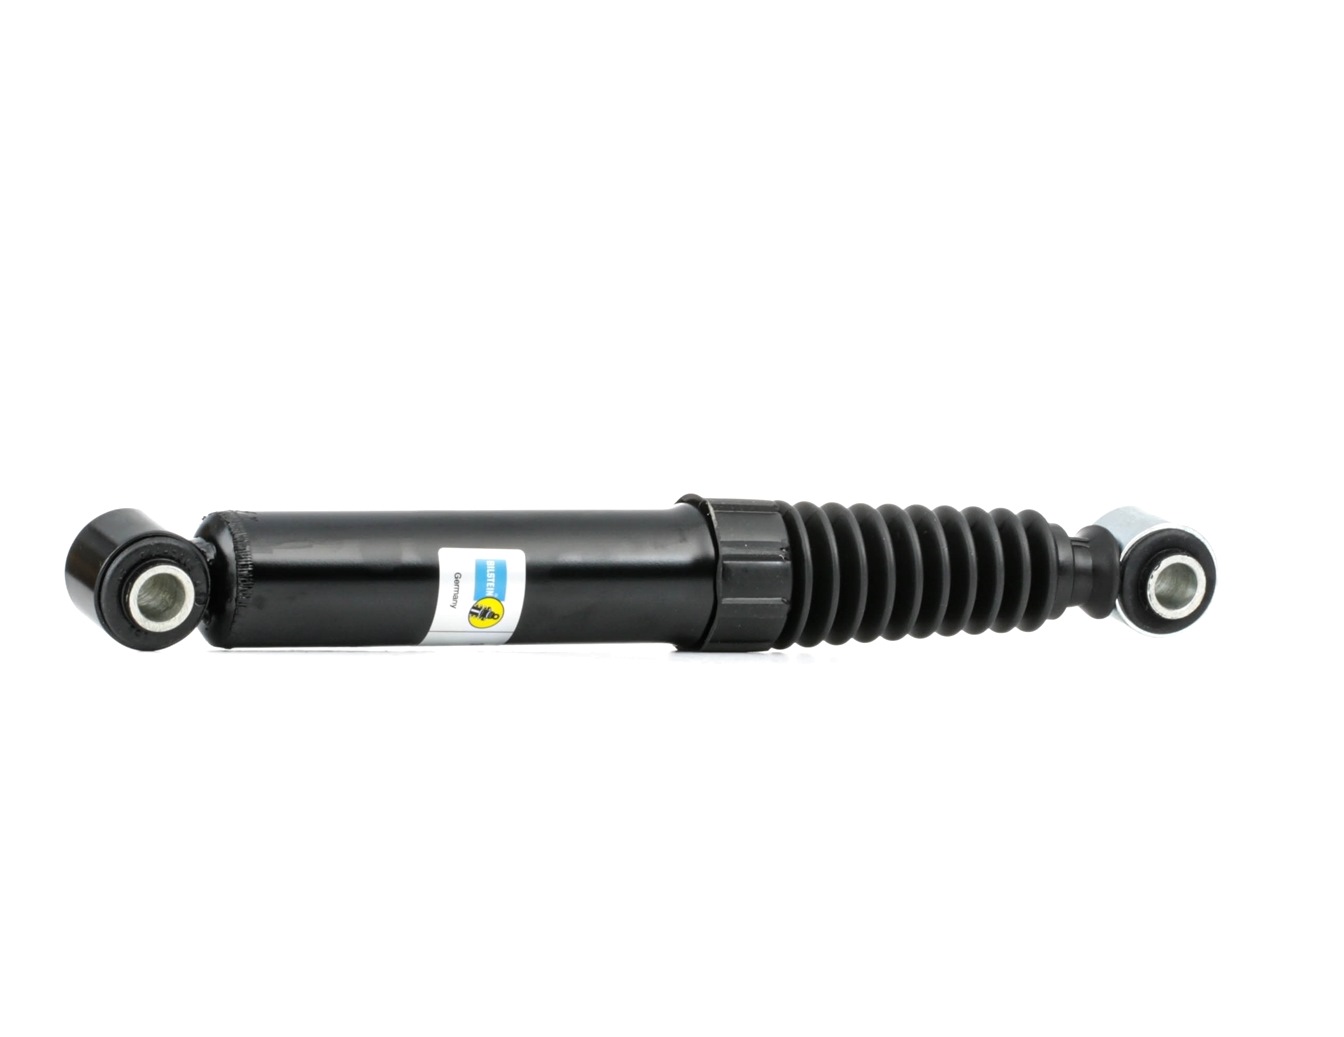 BNE-A005 BILSTEIN - B4 OE Replacement 19-100050 Shock absorber 5206S6